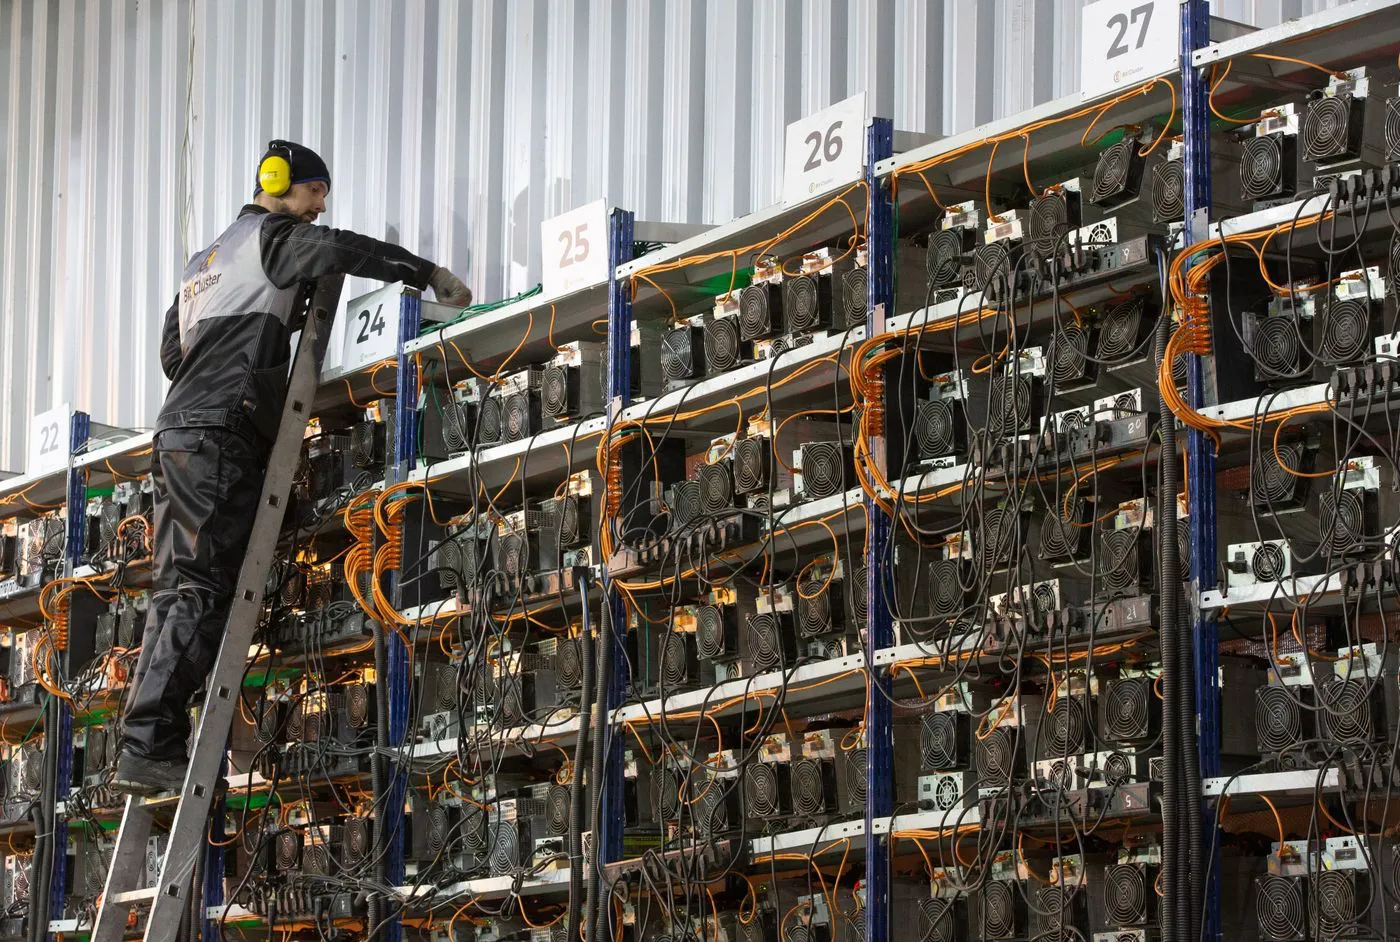 An engineer inspects racks of mining devices at a cryptocurrency mining farm in Norilsk